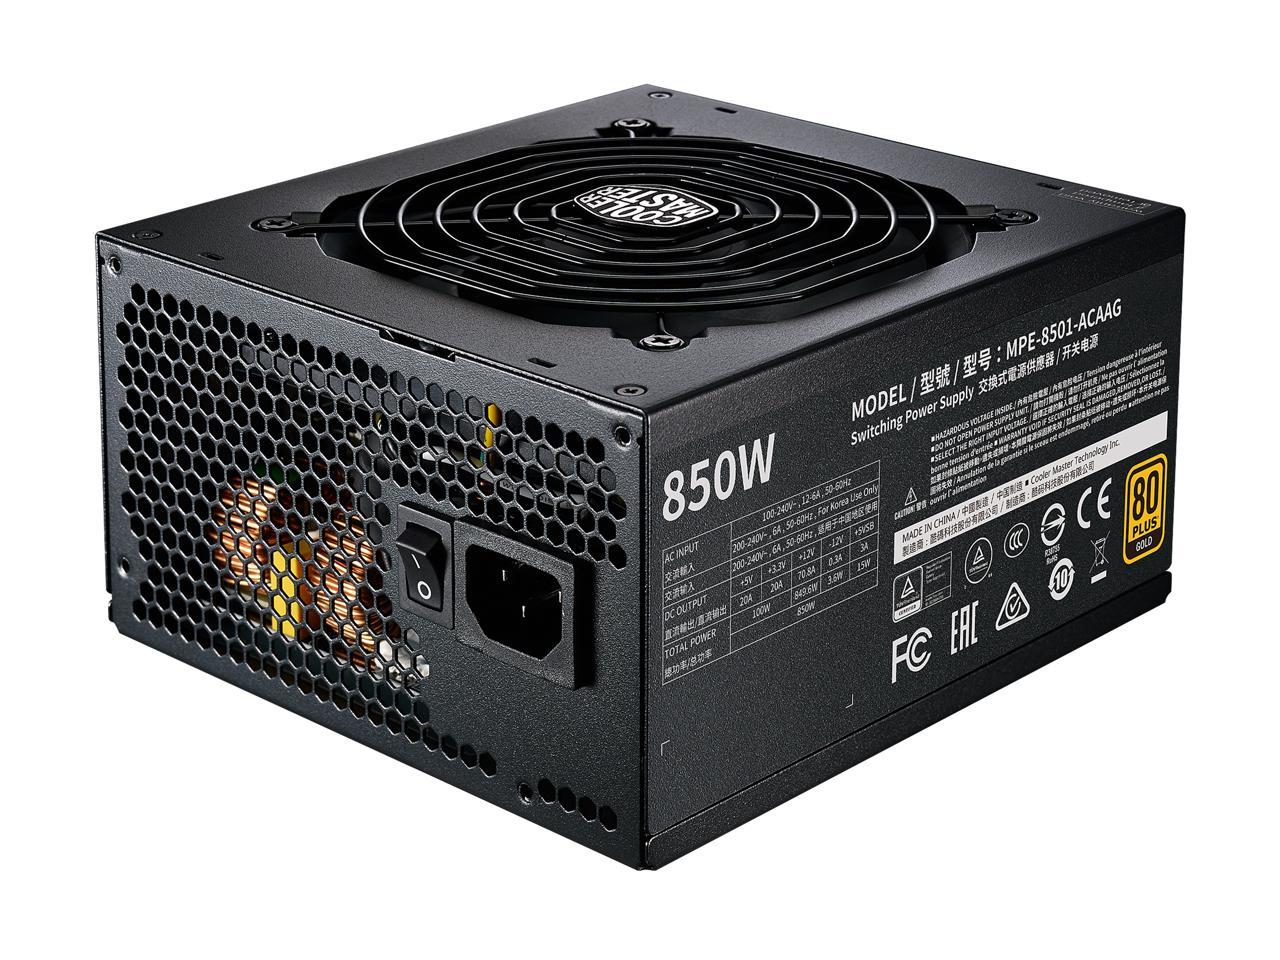 Cooler Master MWE Gold 850 V2 Fully Modular, 850W, 80+ Gold Efficiency, Quiet HDB Fan, 2 EPS Connectors, High Temperature Resilience, 5 Year Warranty